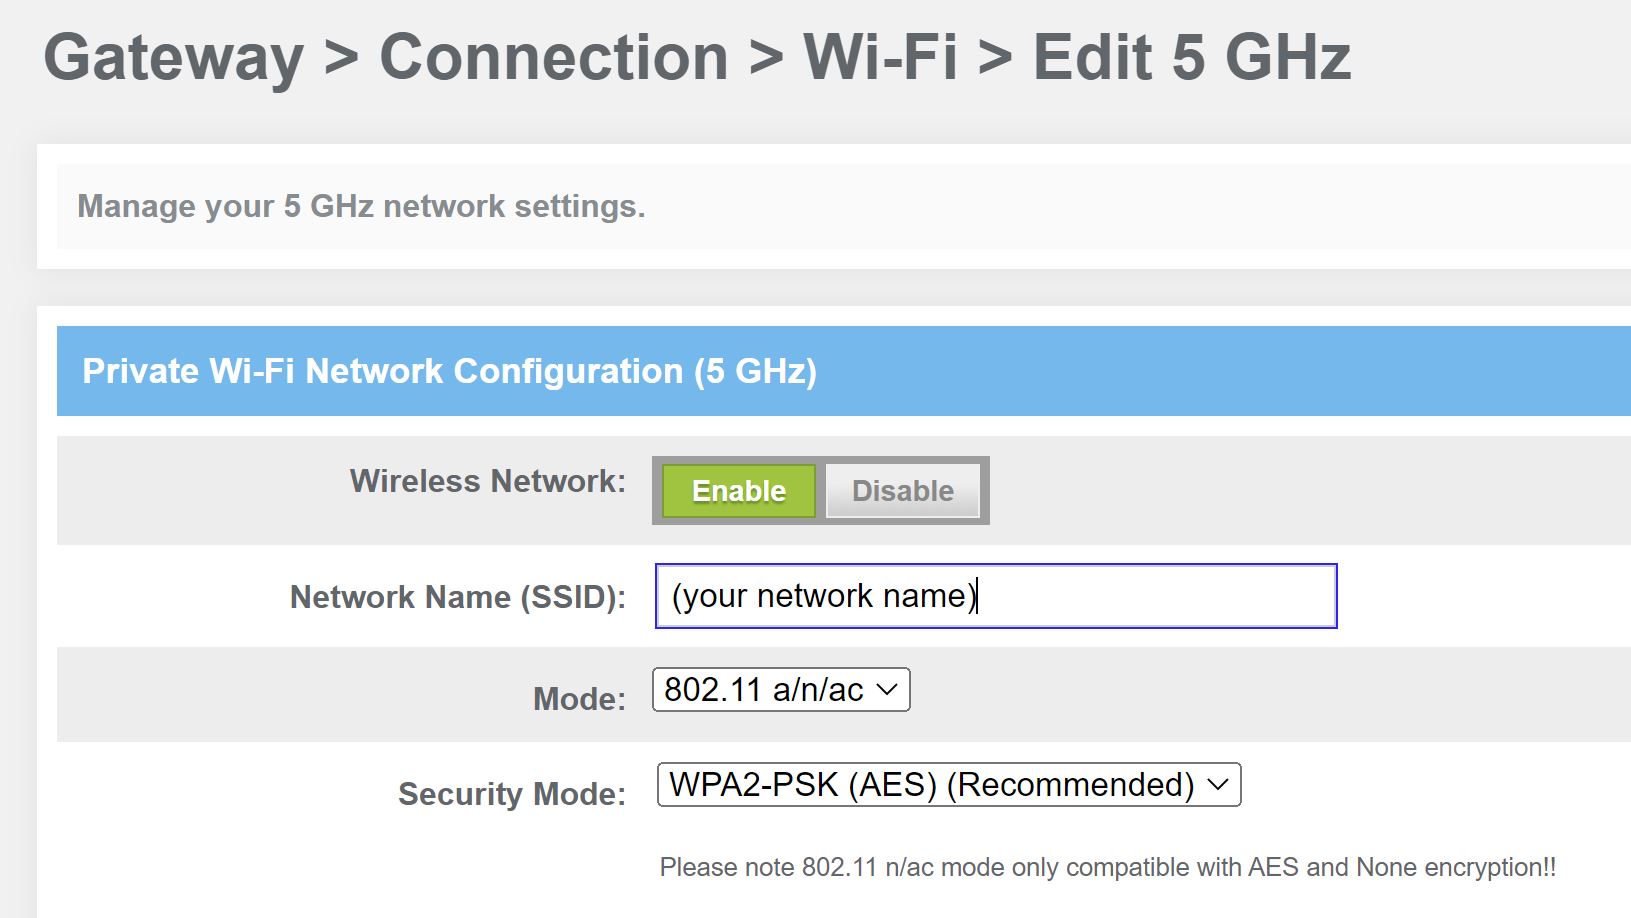 Check your Wi-Fi network security settings: Ensure that your Wi-Fi network is using the latest security protocols, such as WPA2 or WPA3, to protect your connection.
Update your Wi-Fi router firmware: Keep your router's firmware up to date to ensure it has the latest security patches and improvements.